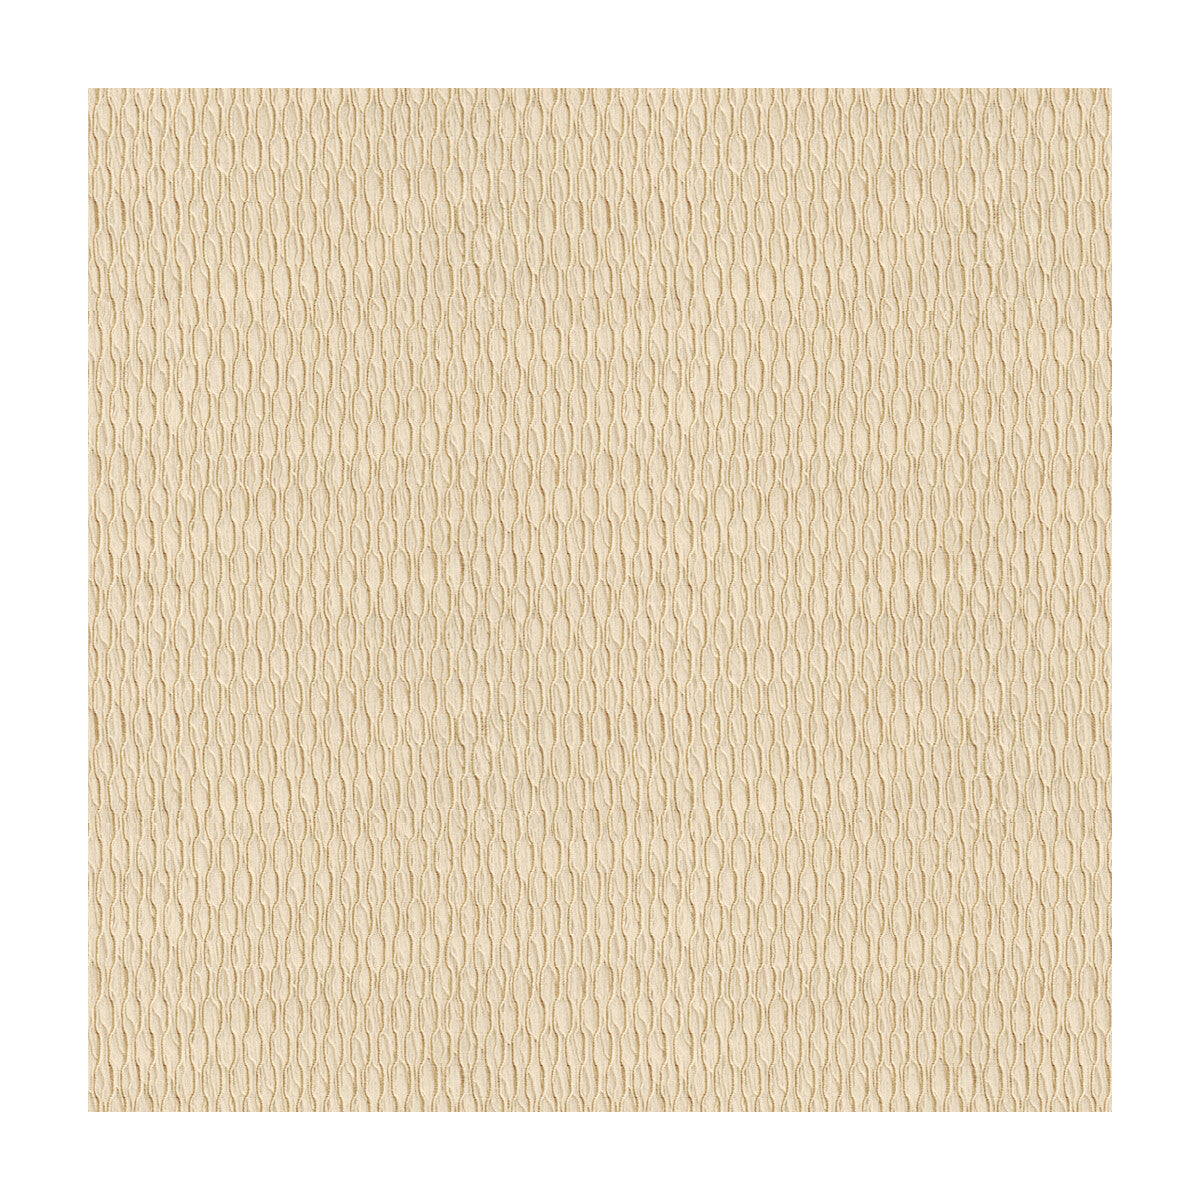 Kravet Contract fabric in 4149-16 color - pattern 4149.16.0 - by Kravet Contract